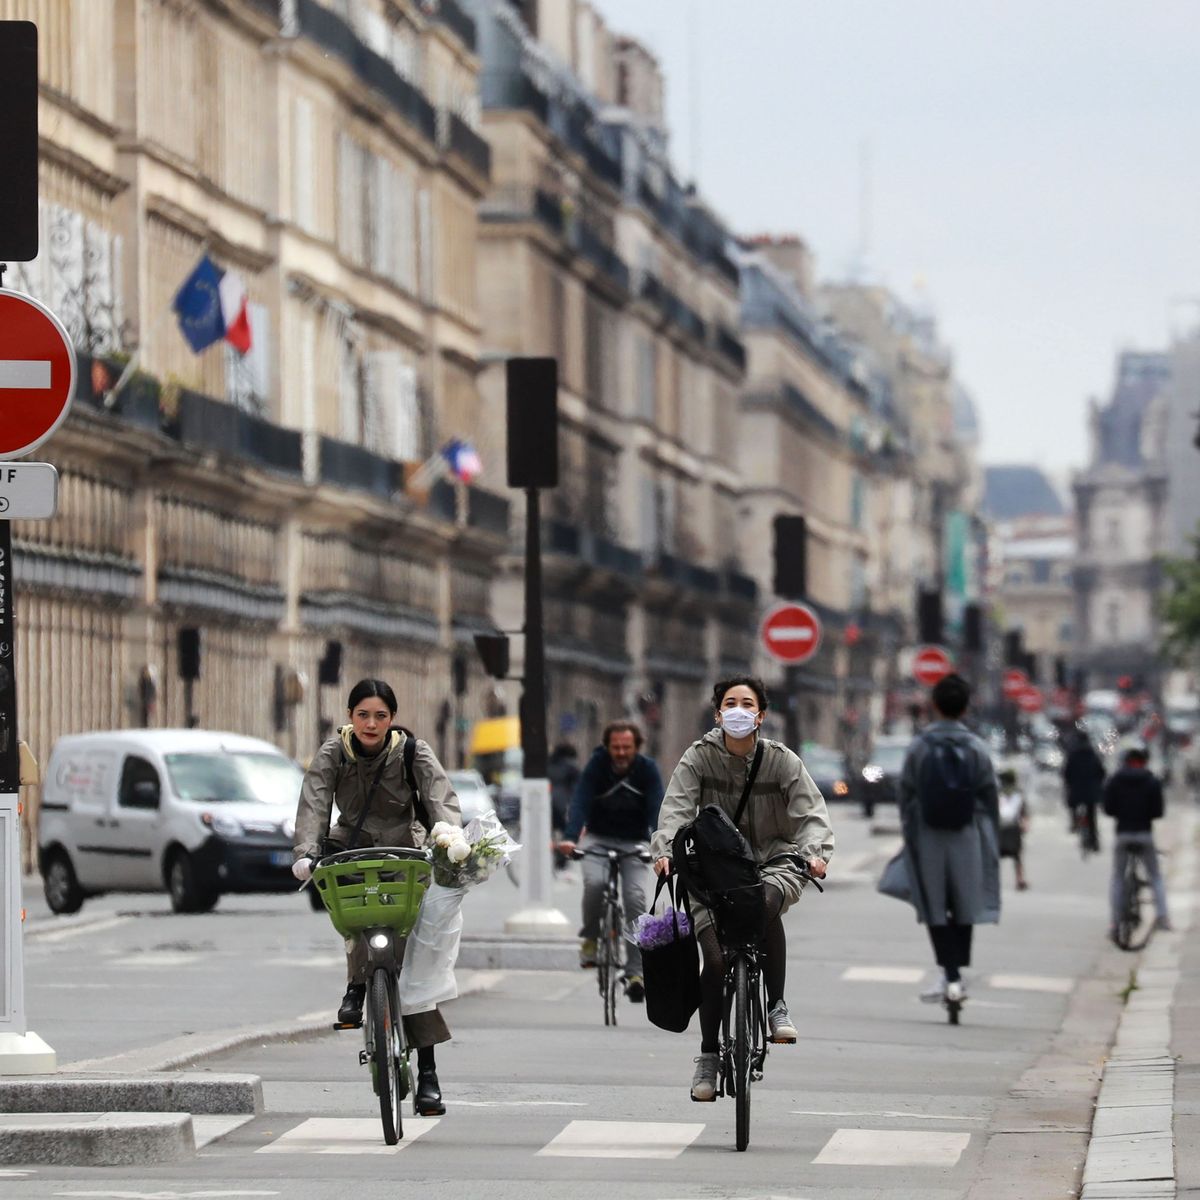 french cyclists in a busy bike lane during the coronavirus pandemic